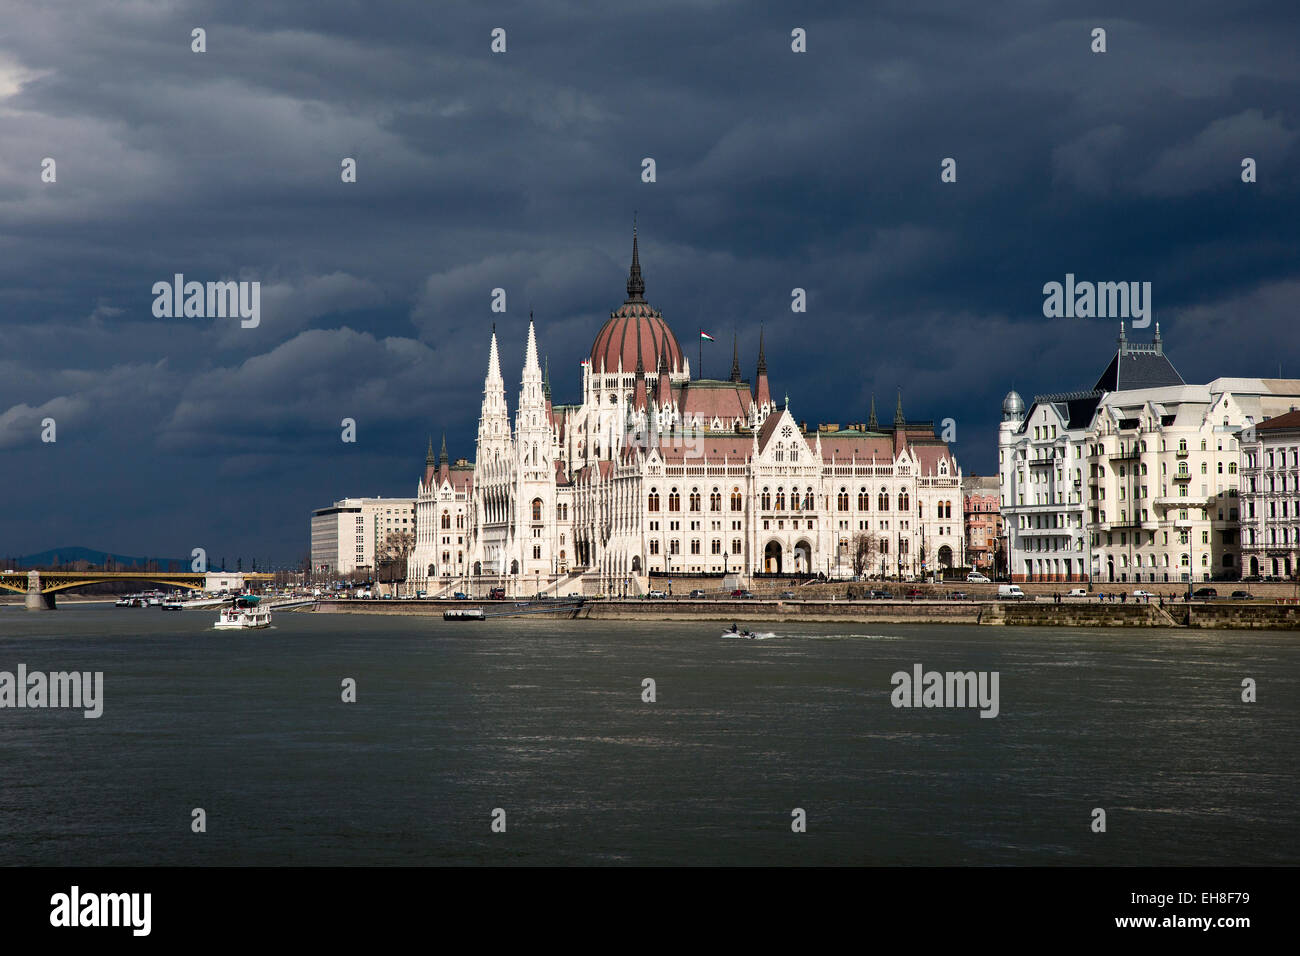 Parliament House on the Danube river, Budapest, Hungary with stormy sky behind Stock Photo